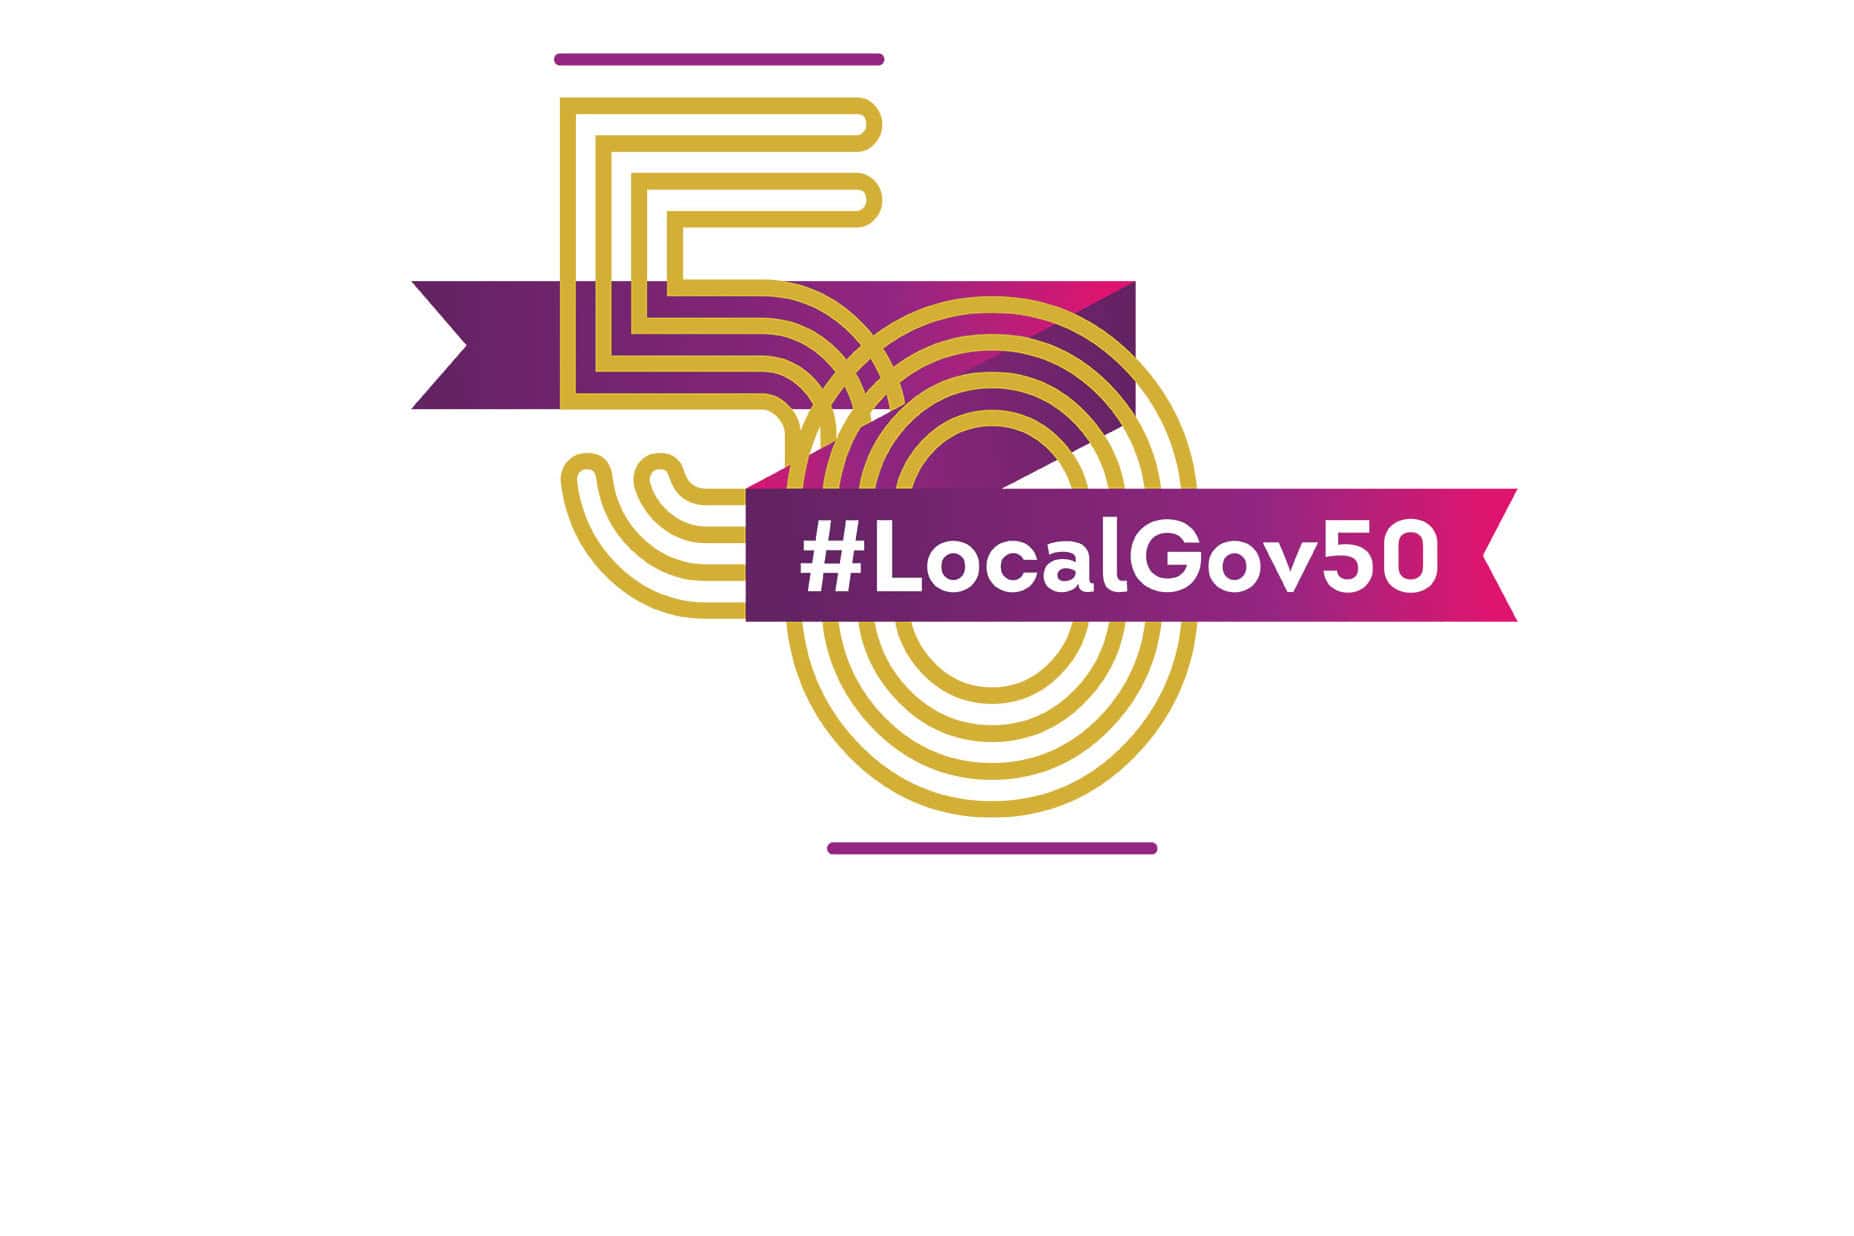 LGA #LocalGov50 hashtag with big ‘50’ in gold, with gold and silver balloons